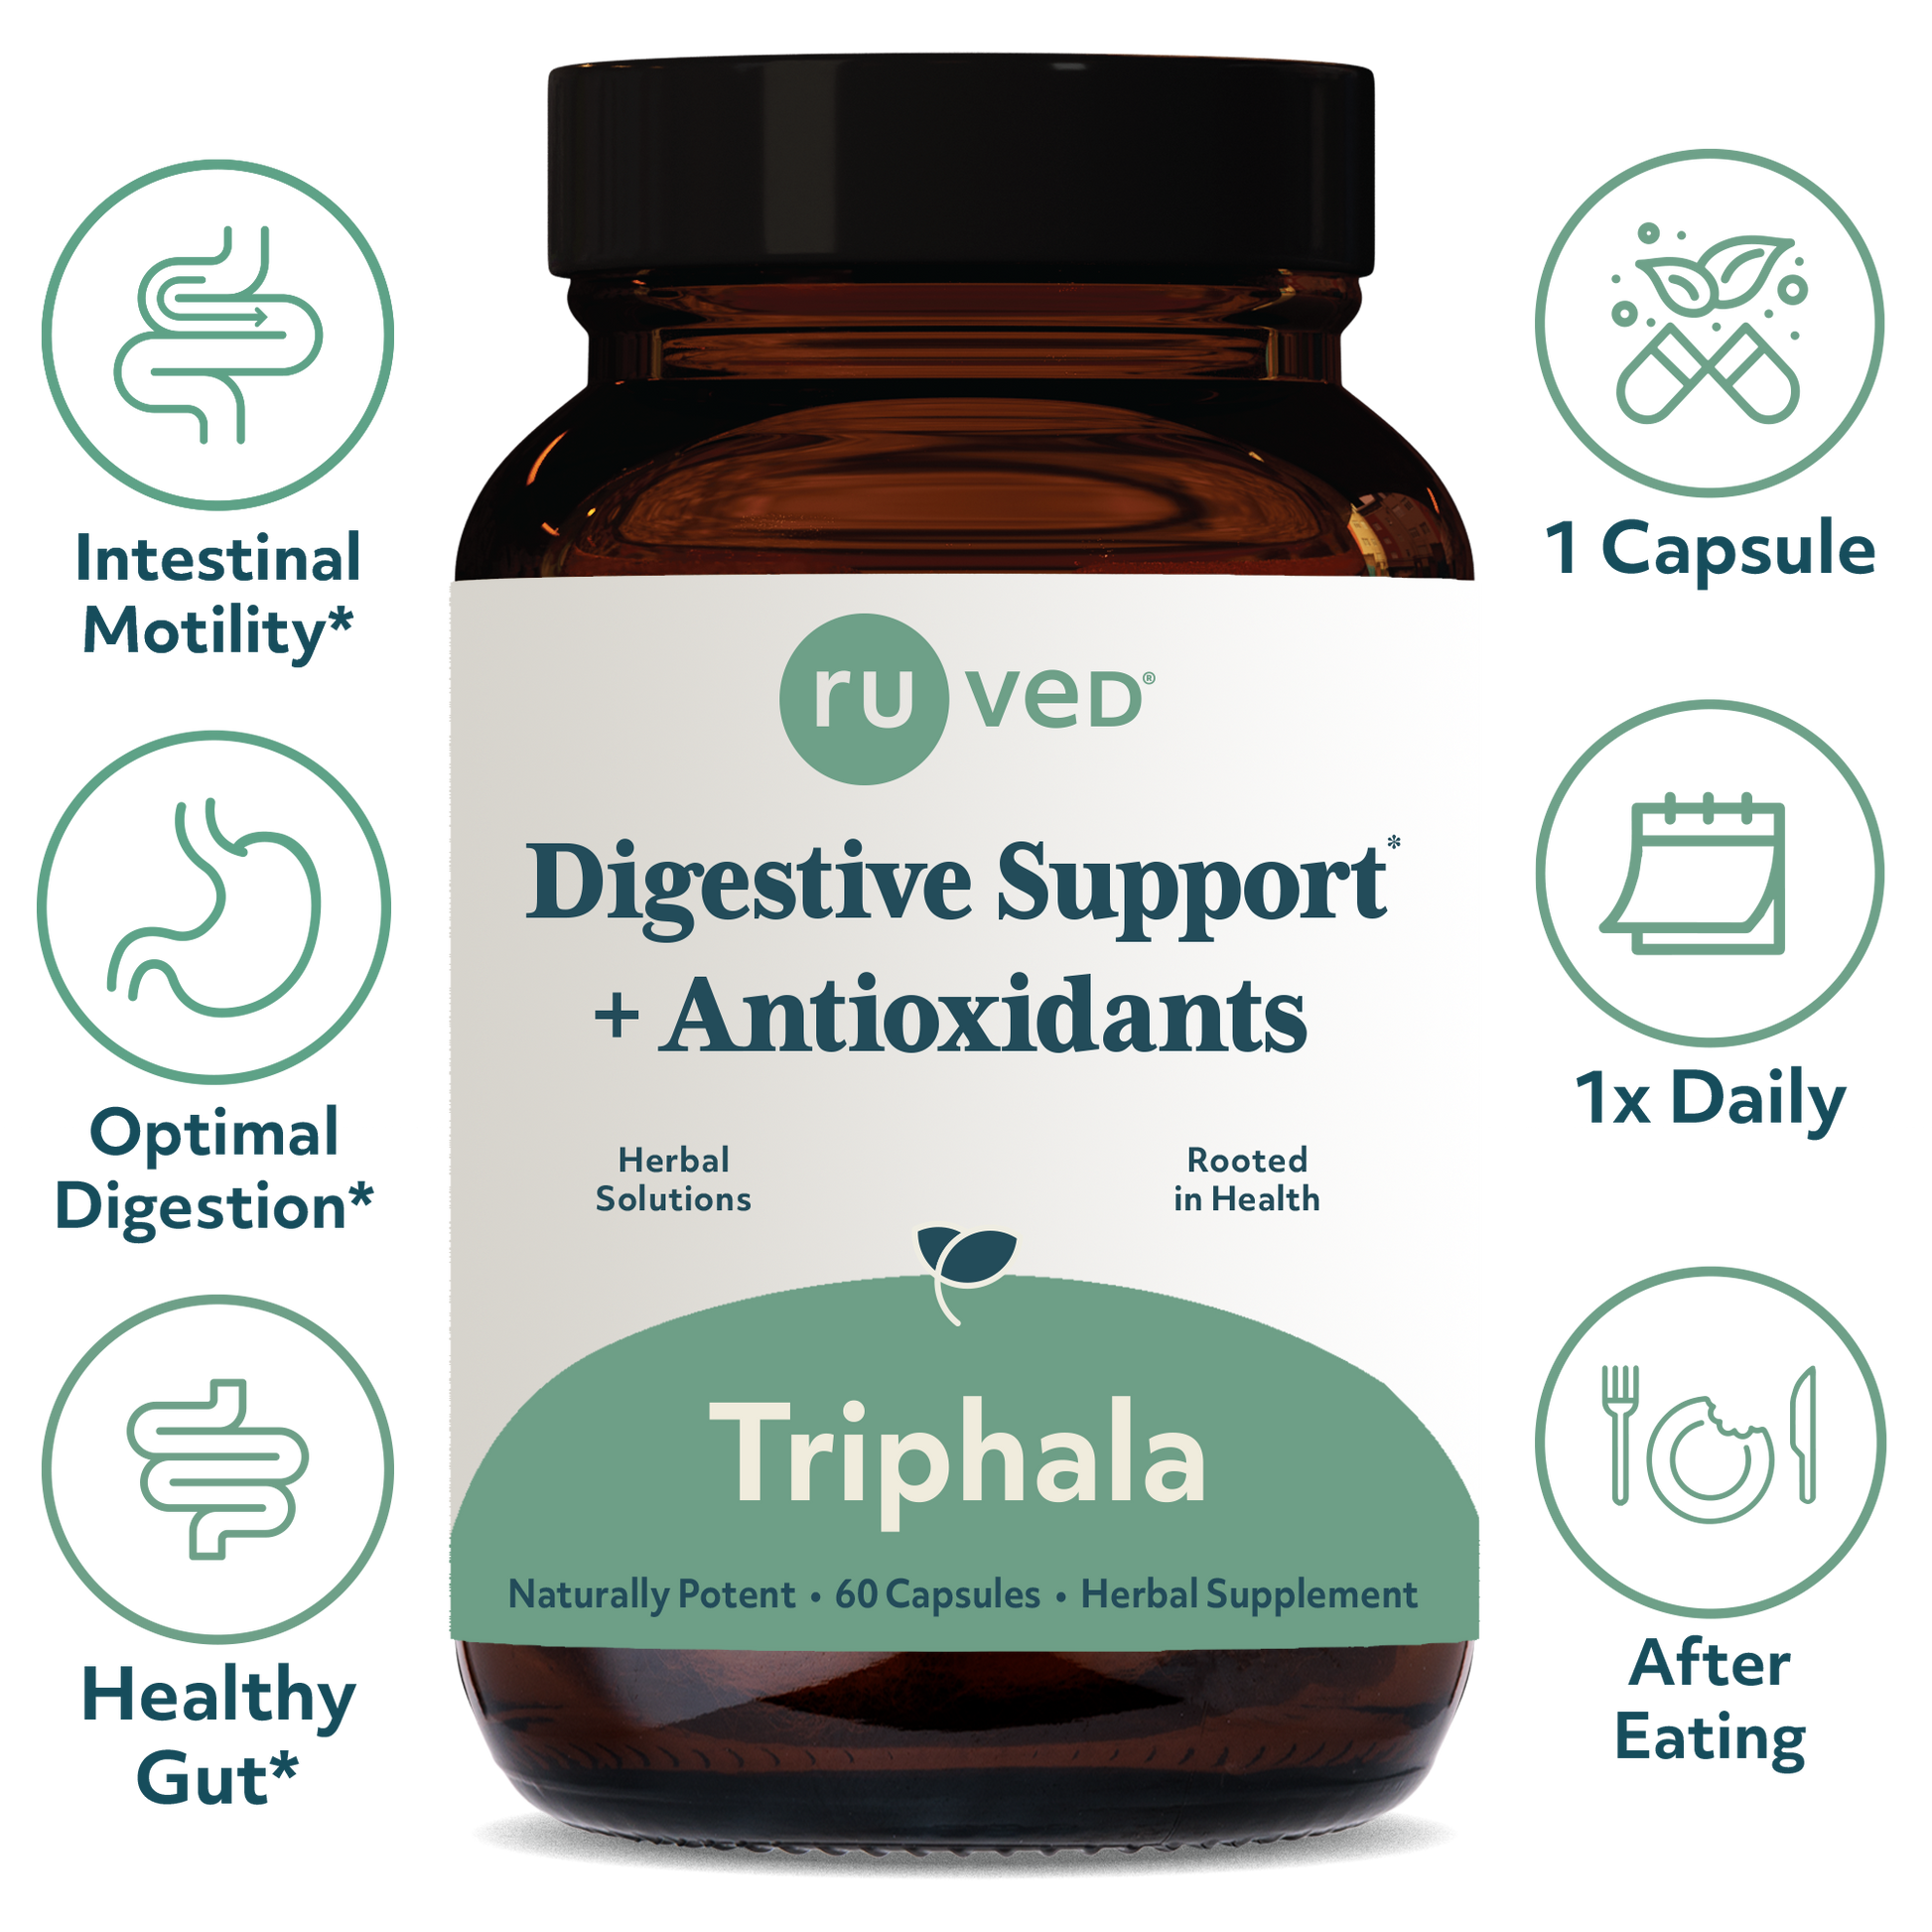 Triphala Capsules Infographics - Ayurvedic Digestive Support, 60 Vegetarian Capsules, Herbal Blend for Gut Health and Digestion Detoxification.